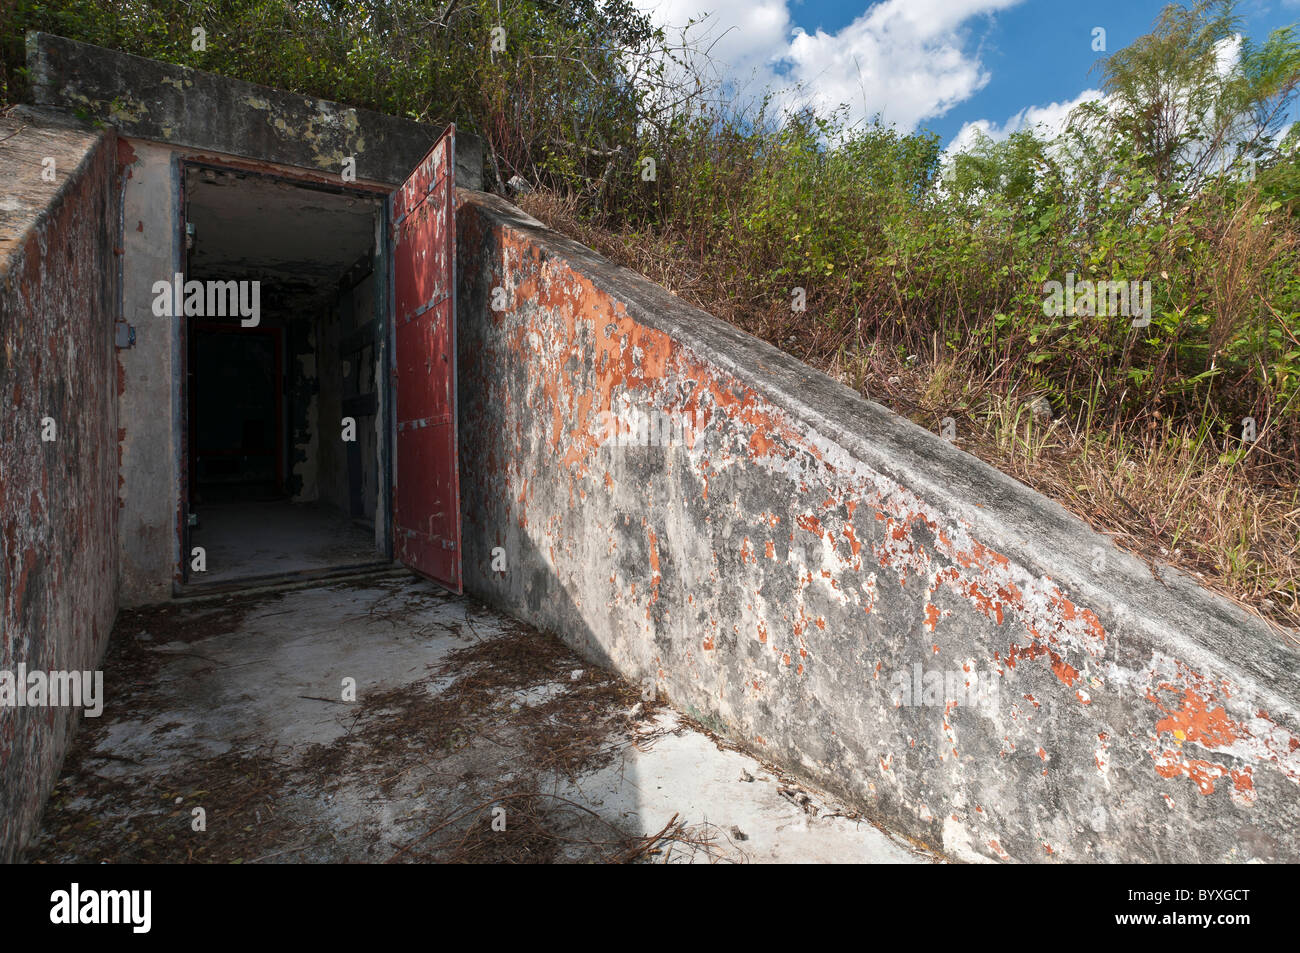 Bomb proof entrance to Nike Hercules Missile building at Cuban Missile Crisis era site, Everglades National Park, Florida Stock Photo